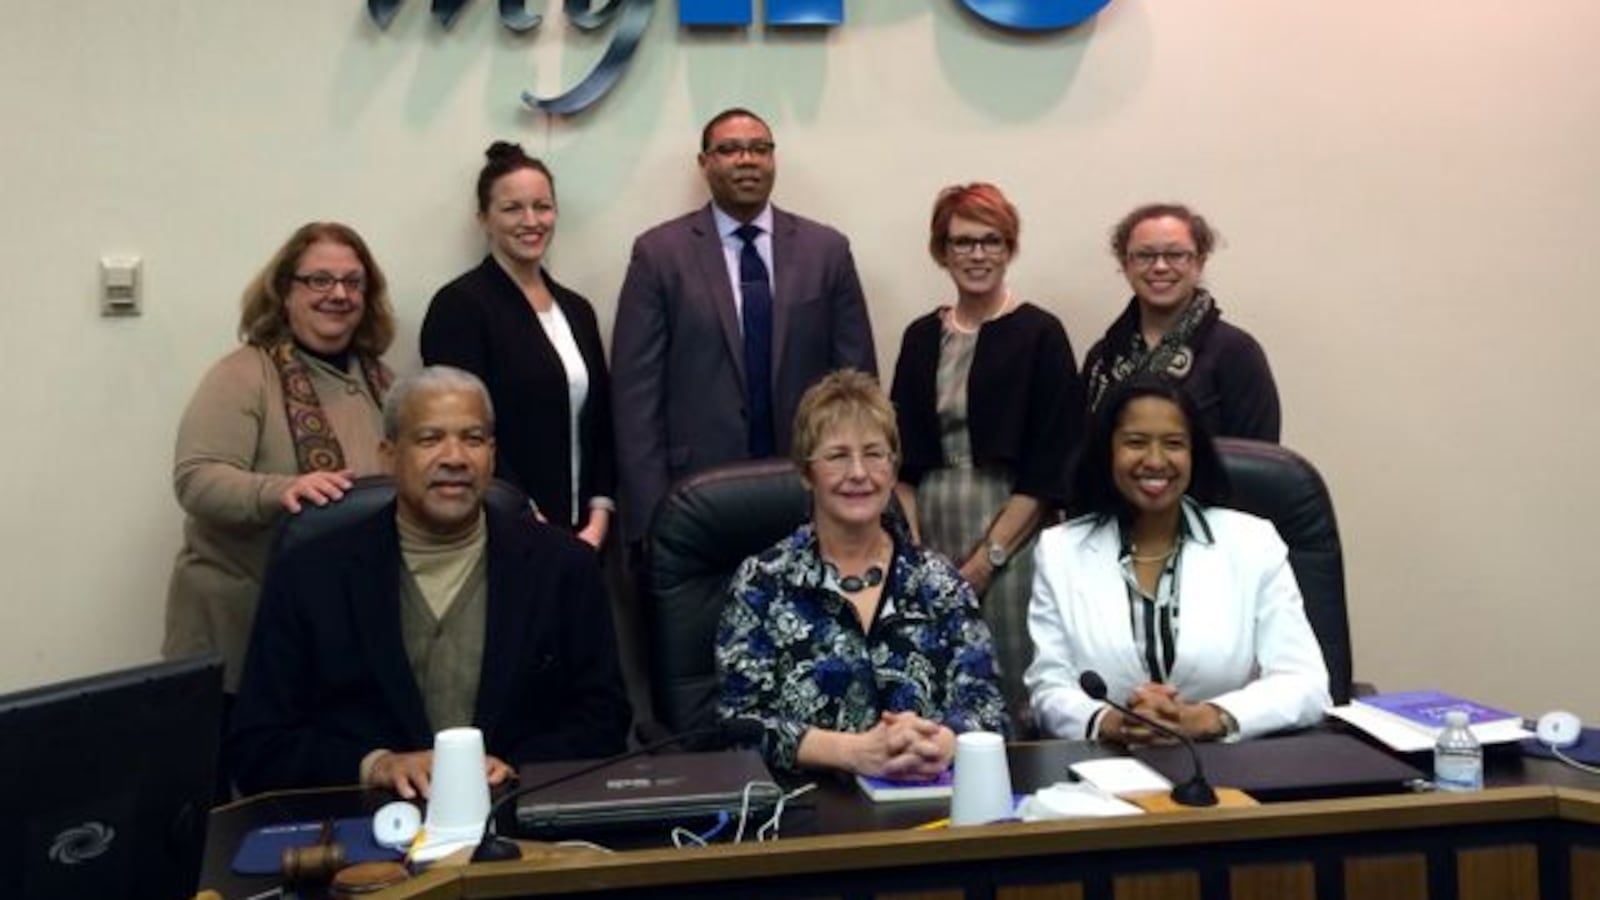 Three new members joined the Indianapolis Public School Board tonight. Longtime member Diane Arnold was unanimously elected as president.